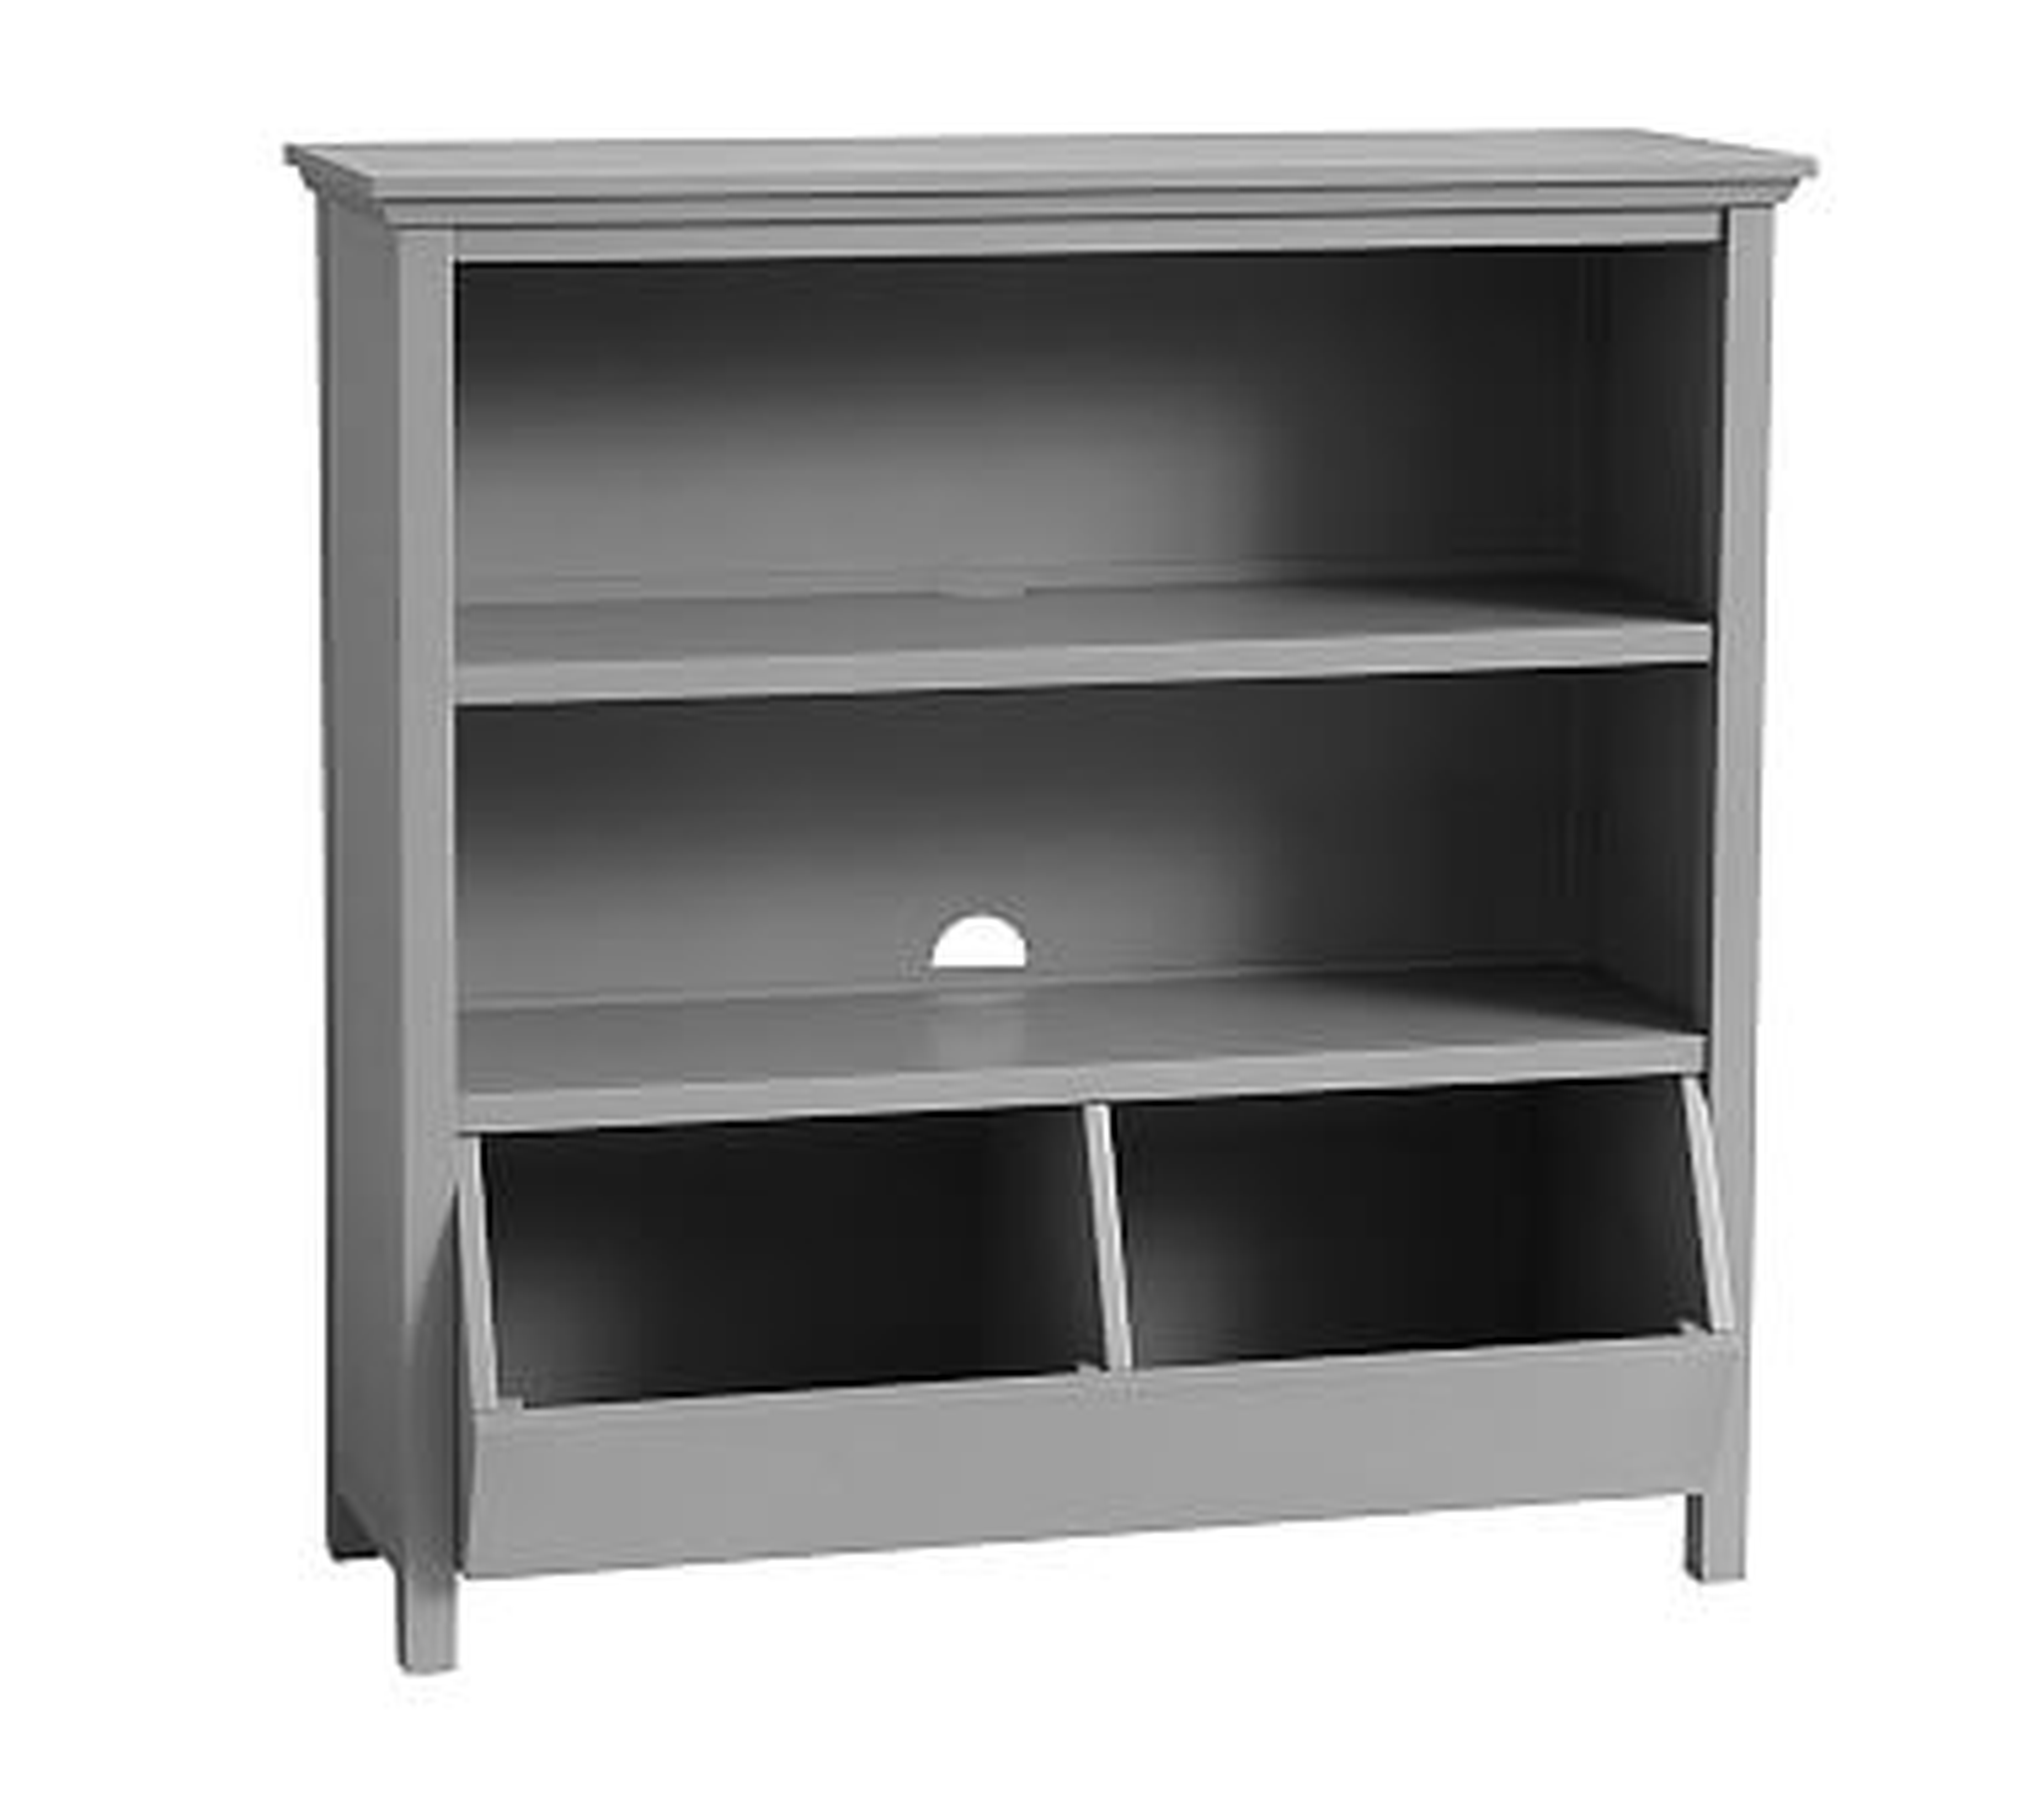 Cameron Storage Bookcase, Charcoal, Standard UPS Delivery - Pottery Barn Kids